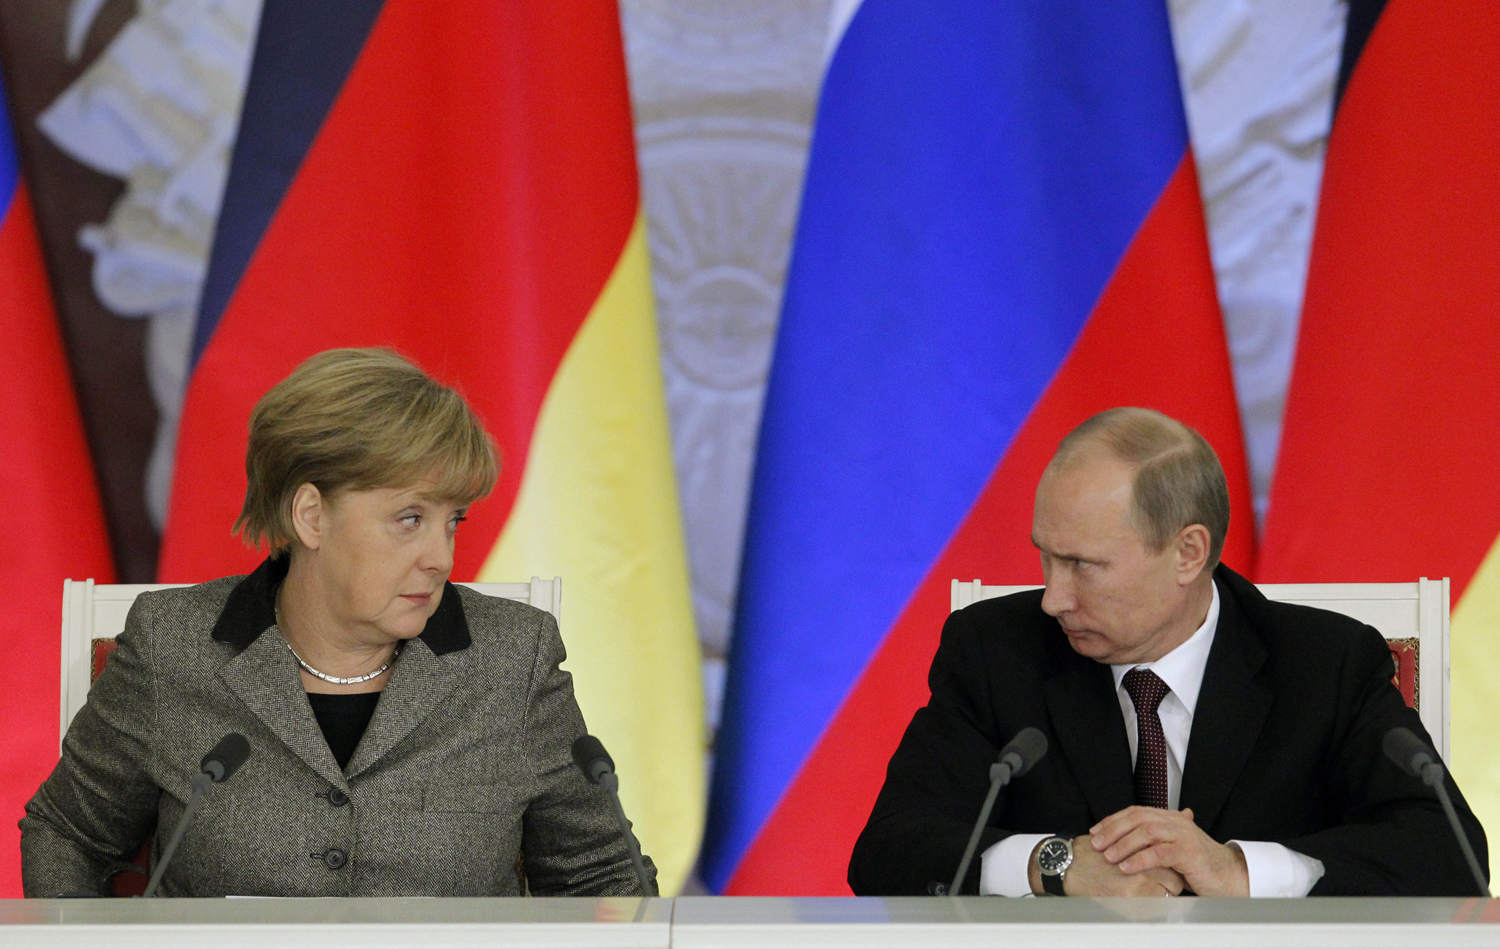 From left: German Chancellor Angela Merkel and Russian President Vladimir Putin answer journalists' questions during a joint news conference in Moscow's Kremlin Nov. 16, 2012. (Maxim Shemetov—Reuters)